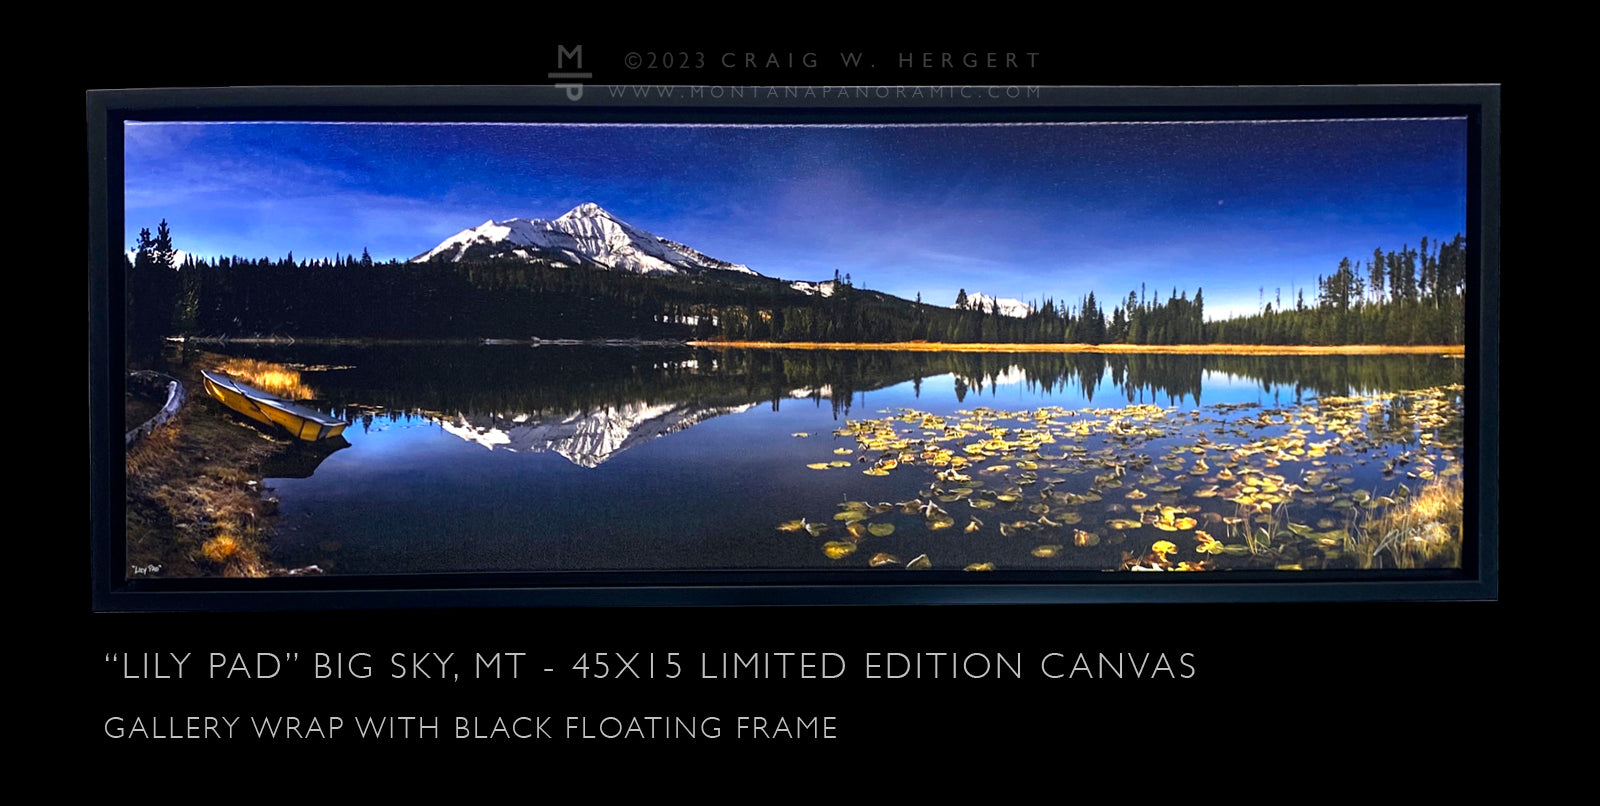 "Lily Pad" - Big Sky, MT - 45" x 15" canvas with black floating frame